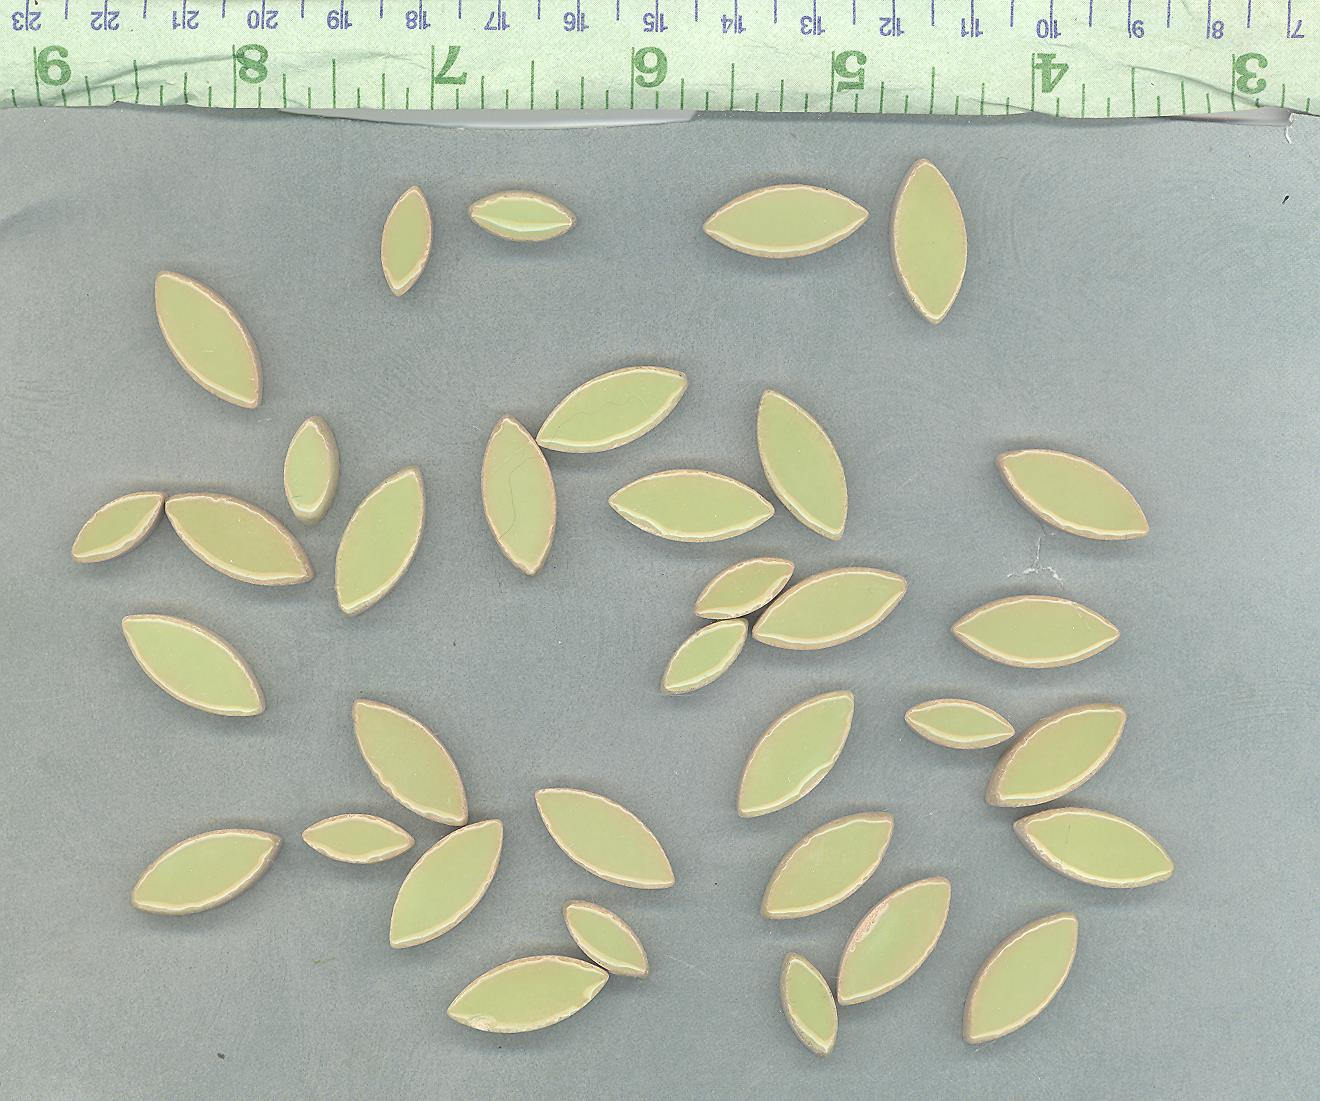 Pistachio Green Petals Mosaic Tiles - 50g Ceramic Leaves in Mix of 2 Sizes 1/2" and 3/4" - Muted Peppermint Green